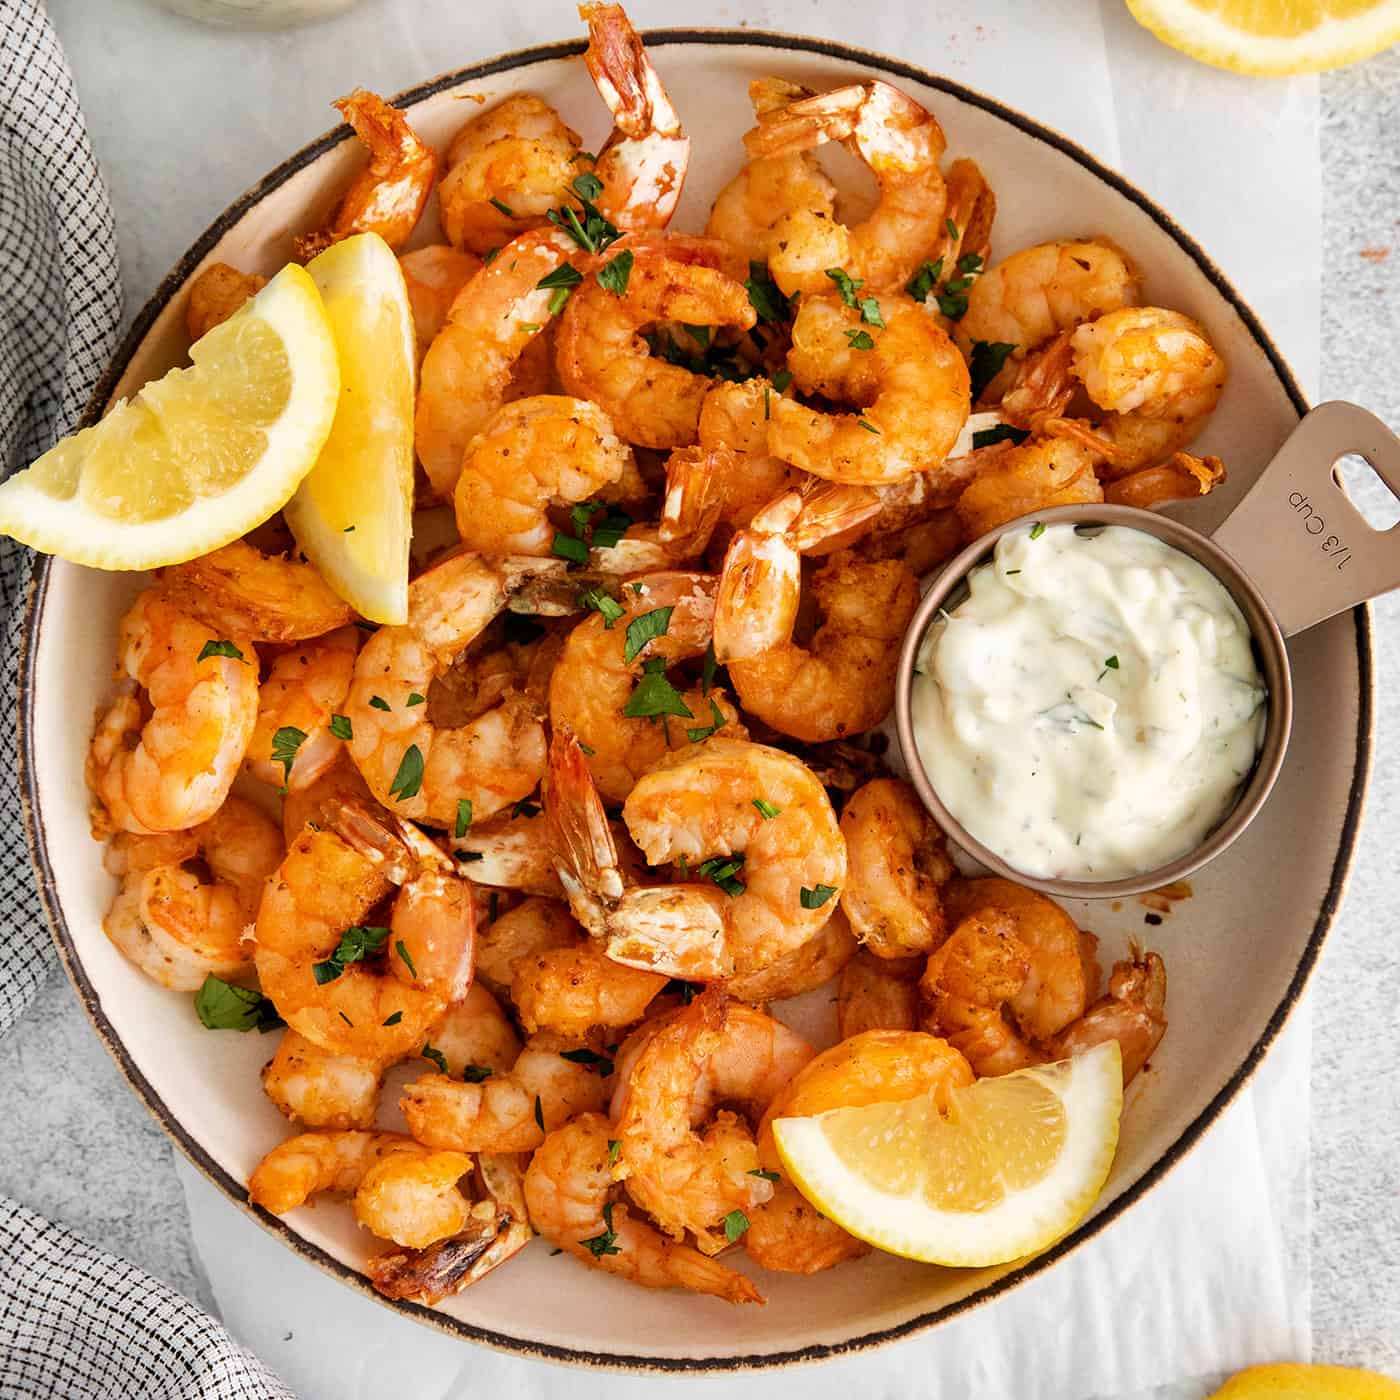 Overhead view of a bowl of air fryer shrimp.